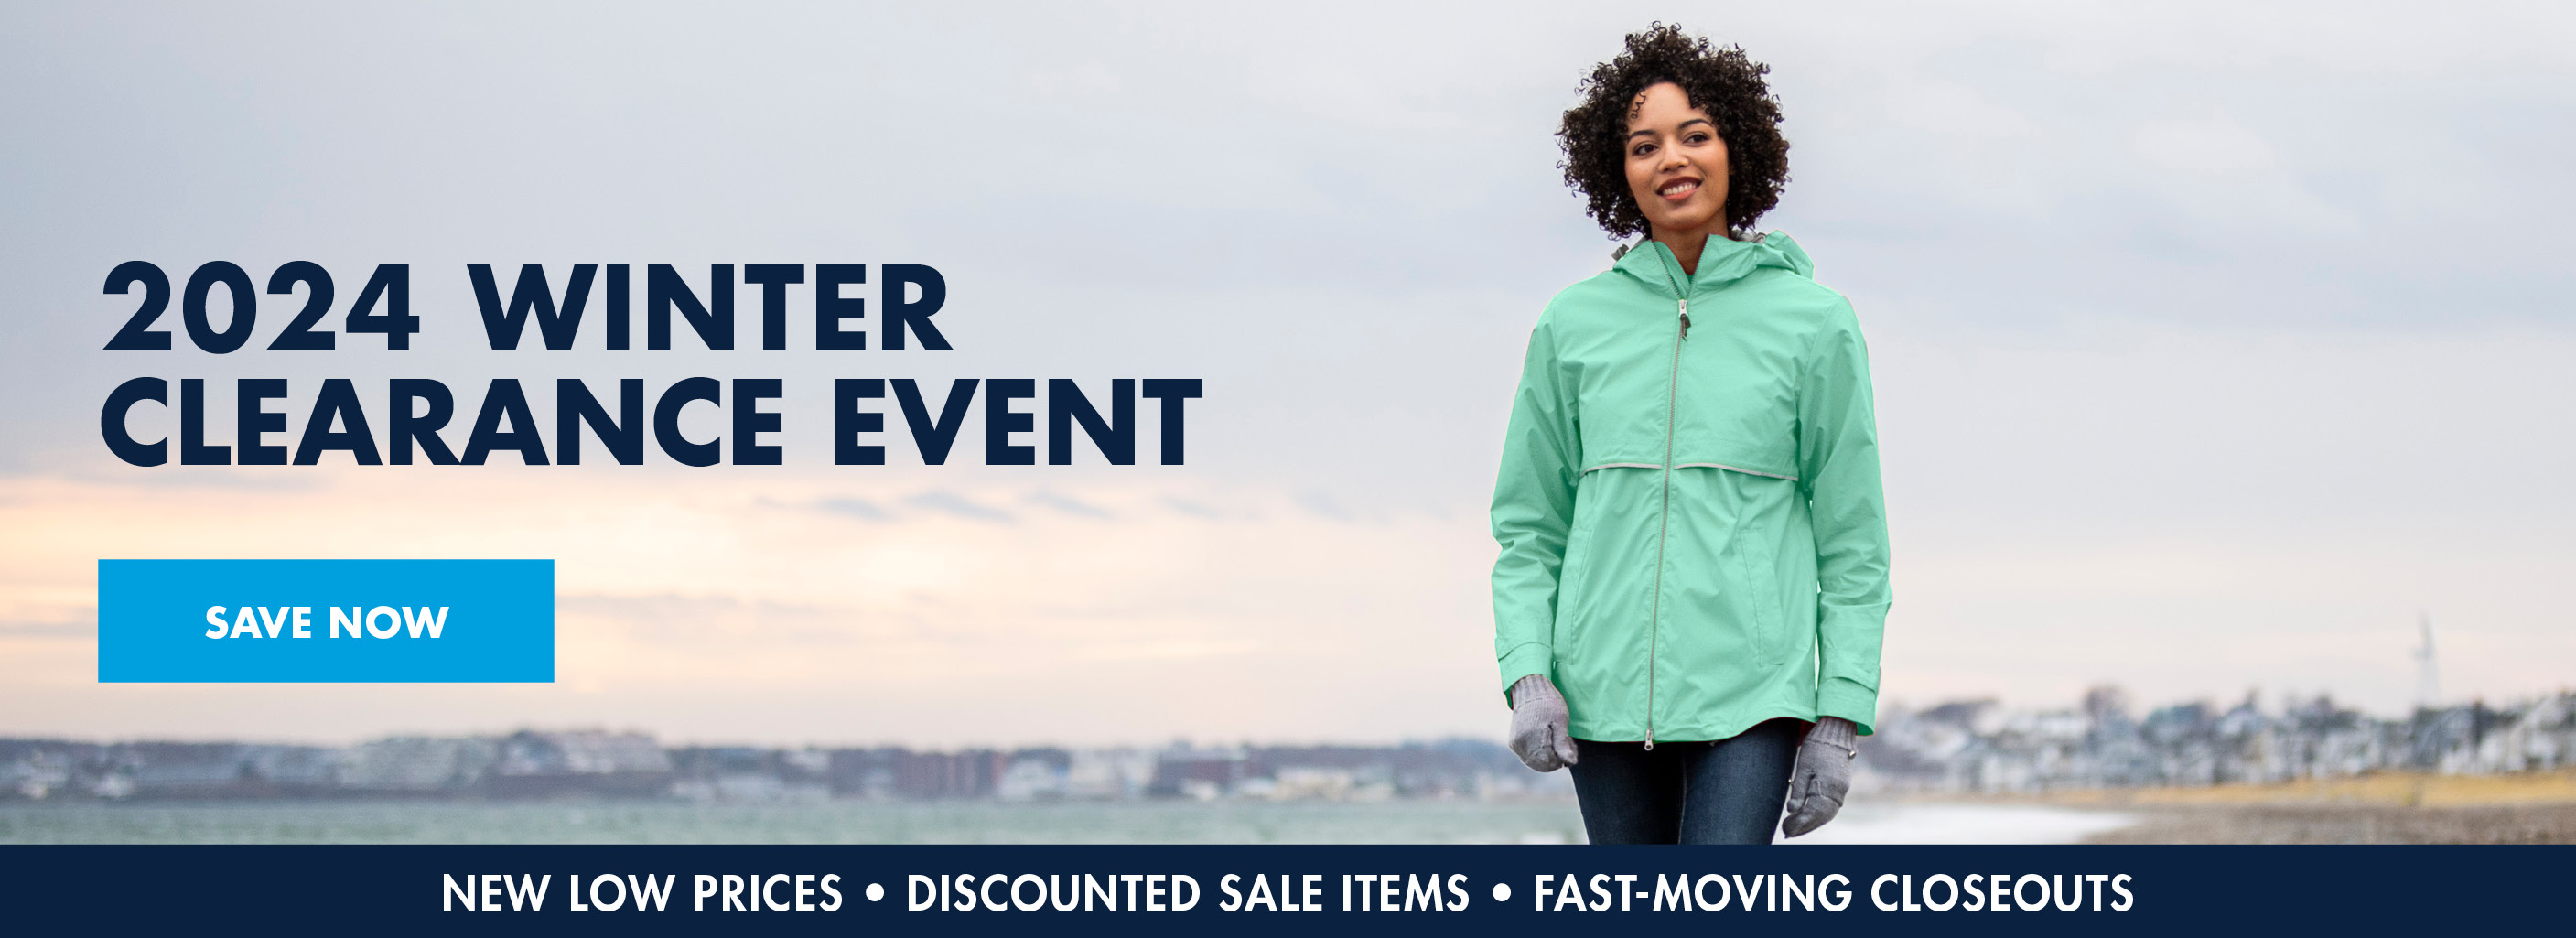 2024 Winter Clearance Event - Save Now - New Low Prices - Discounted Sale Items - Fast-moving Closeouts